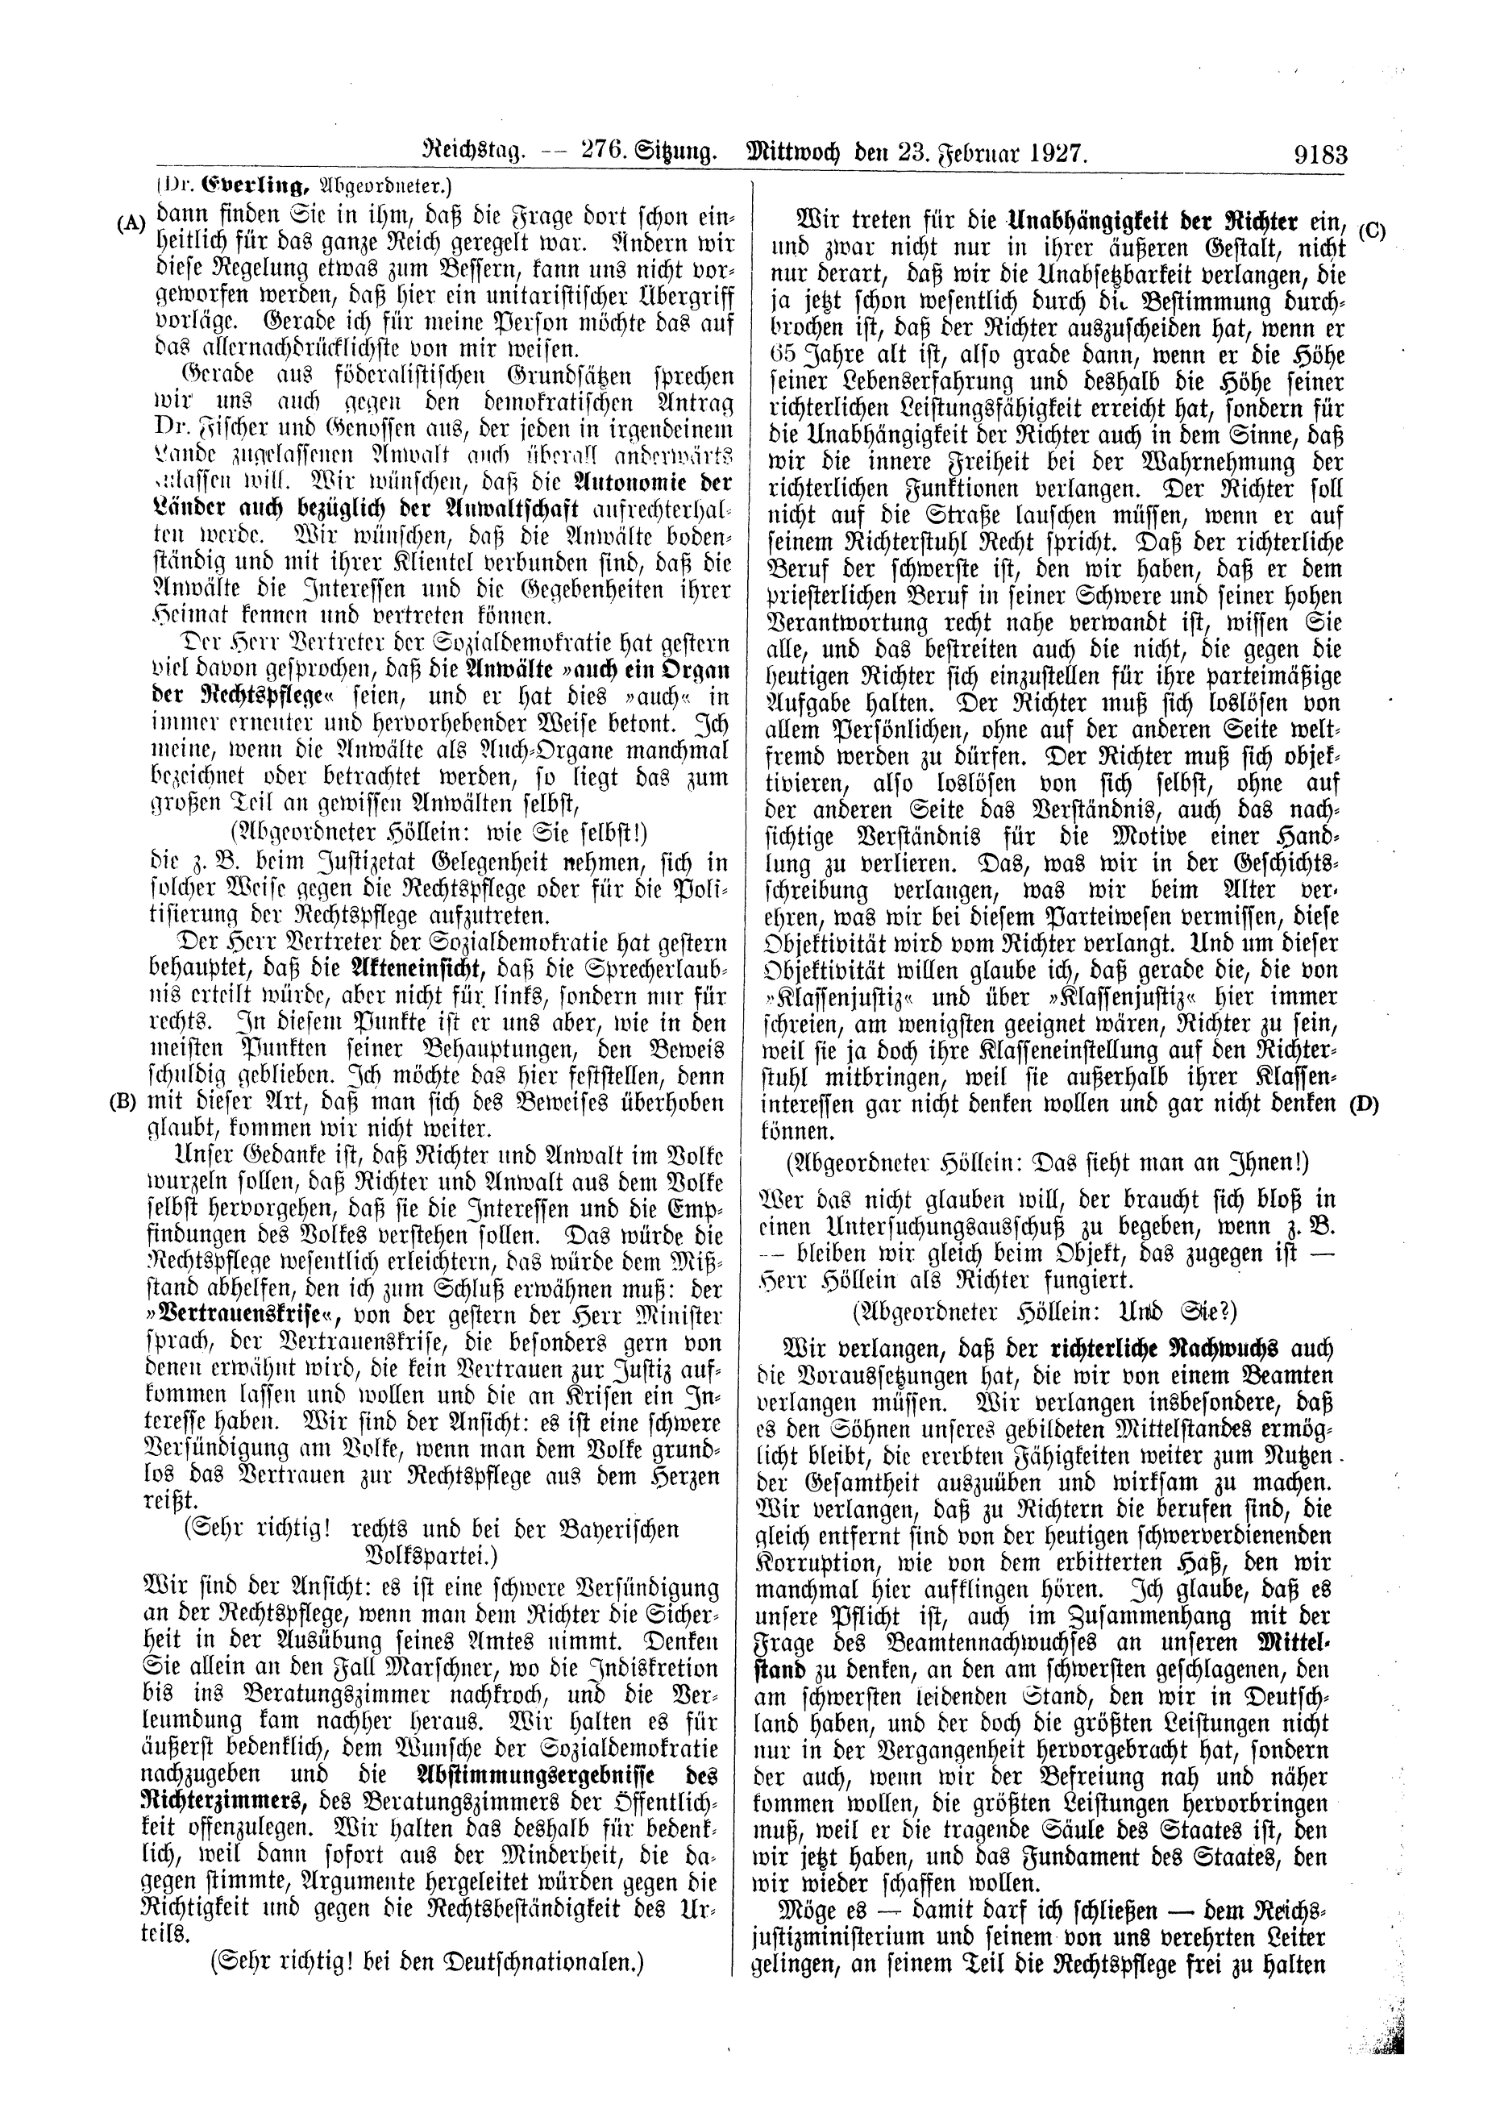 Scan of page 9183